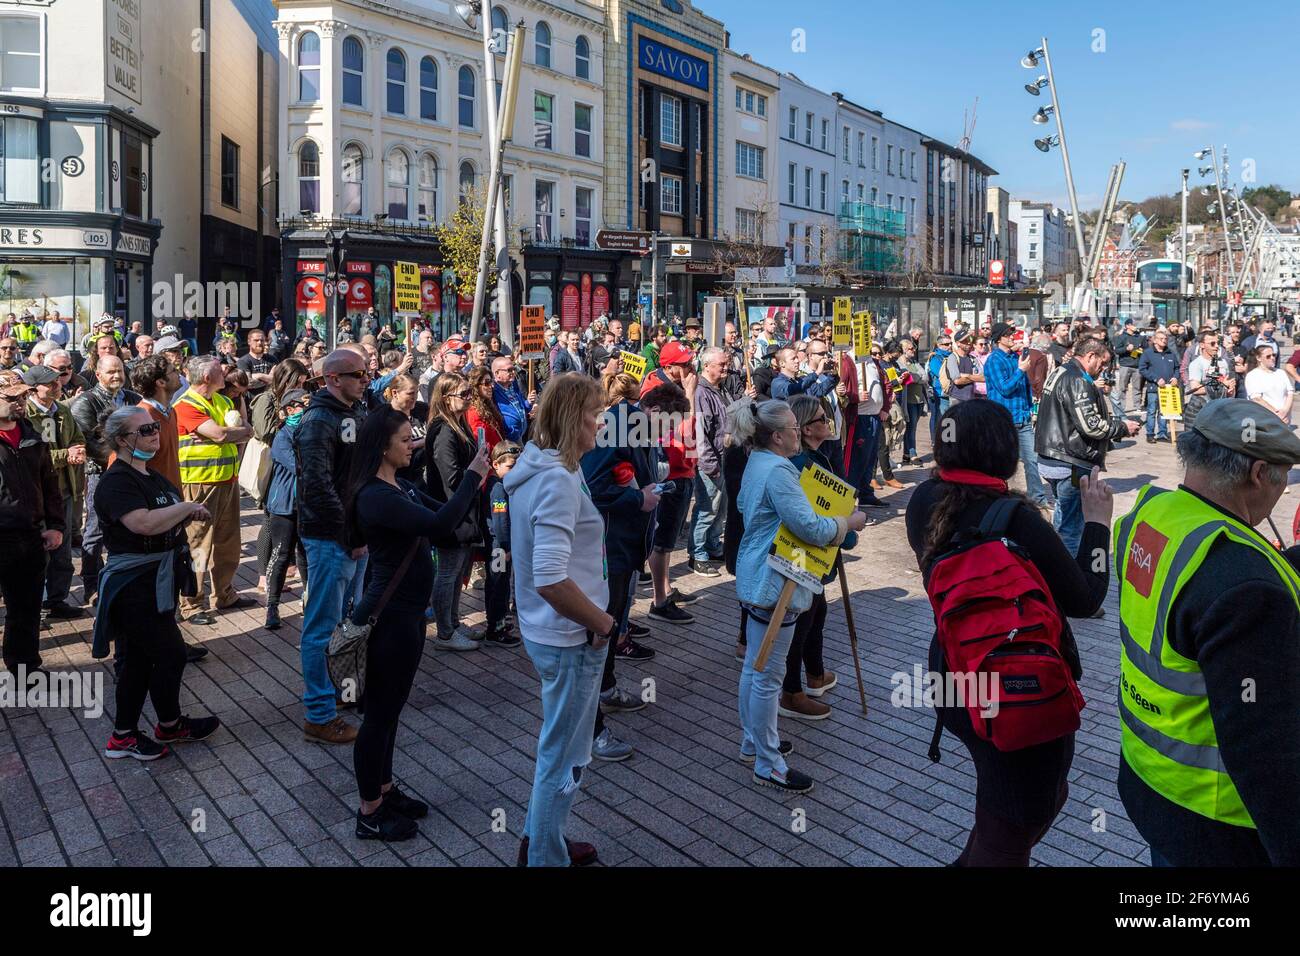 Cork, Ireland. 3rd Apr, 2021. An 'End the Lockdown' protest tokk place in Cork today, the second such event in the space of a month. Approximately 300 people attended in the midst of a heavy Garda presence. The protesters held a rally outside Brown Thomas on Patrick Street after the march. Credit: AG News/Alamy Live News Stock Photo